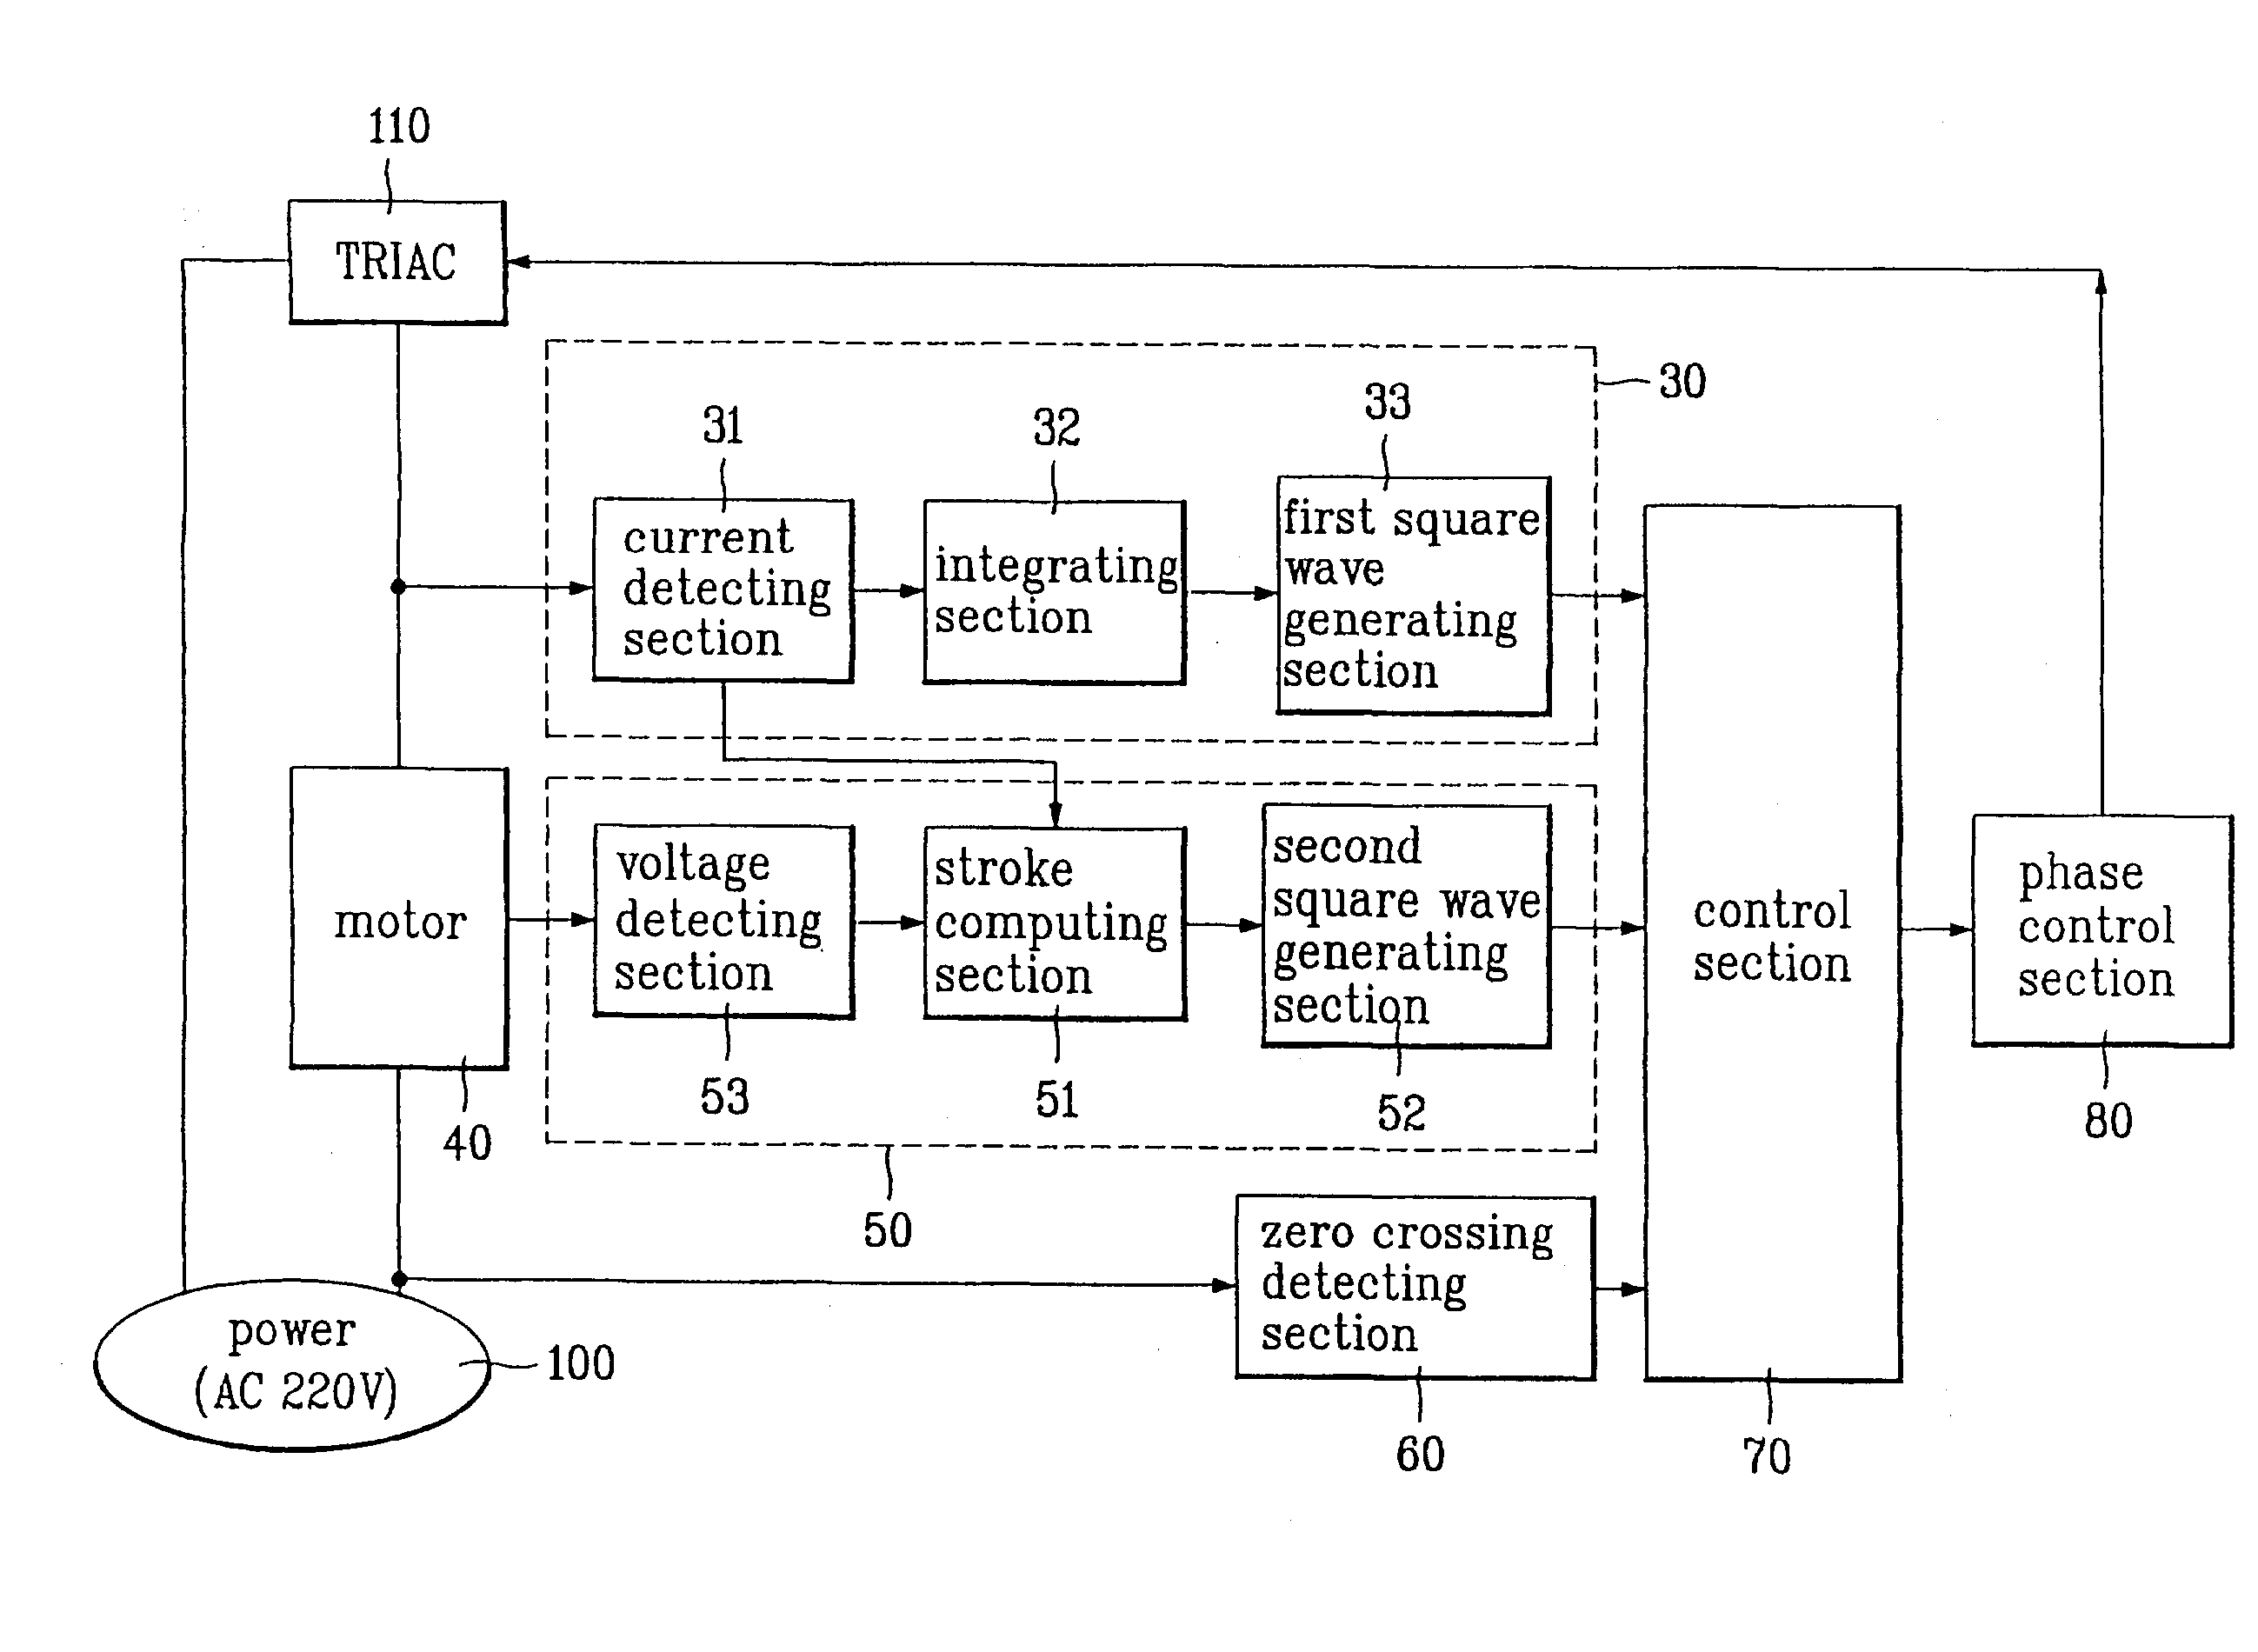 Apparatus and method for controlling a reciprocating compressor